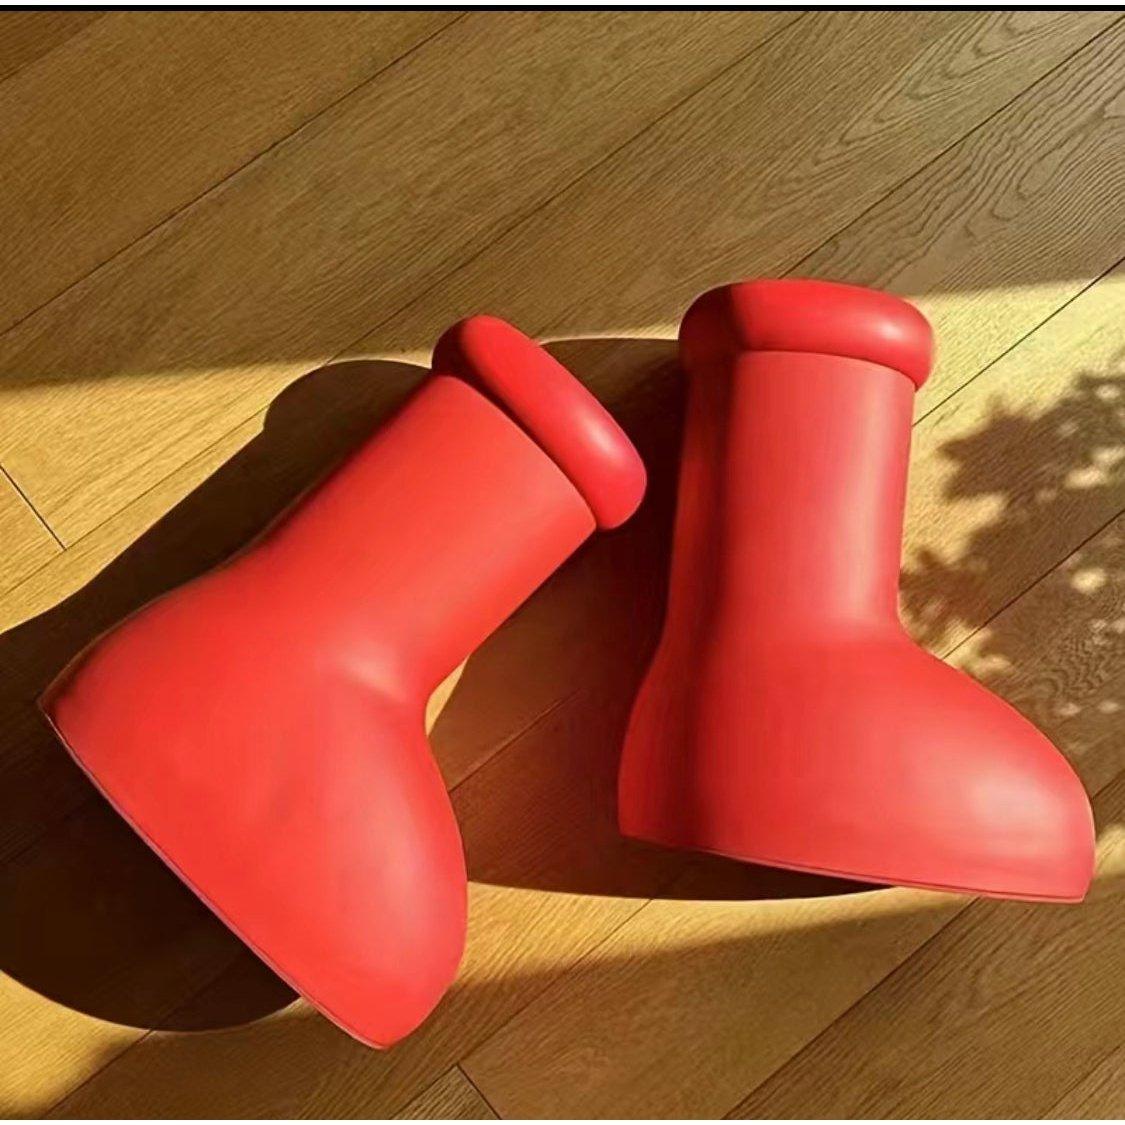 The Viral Big Red Boots